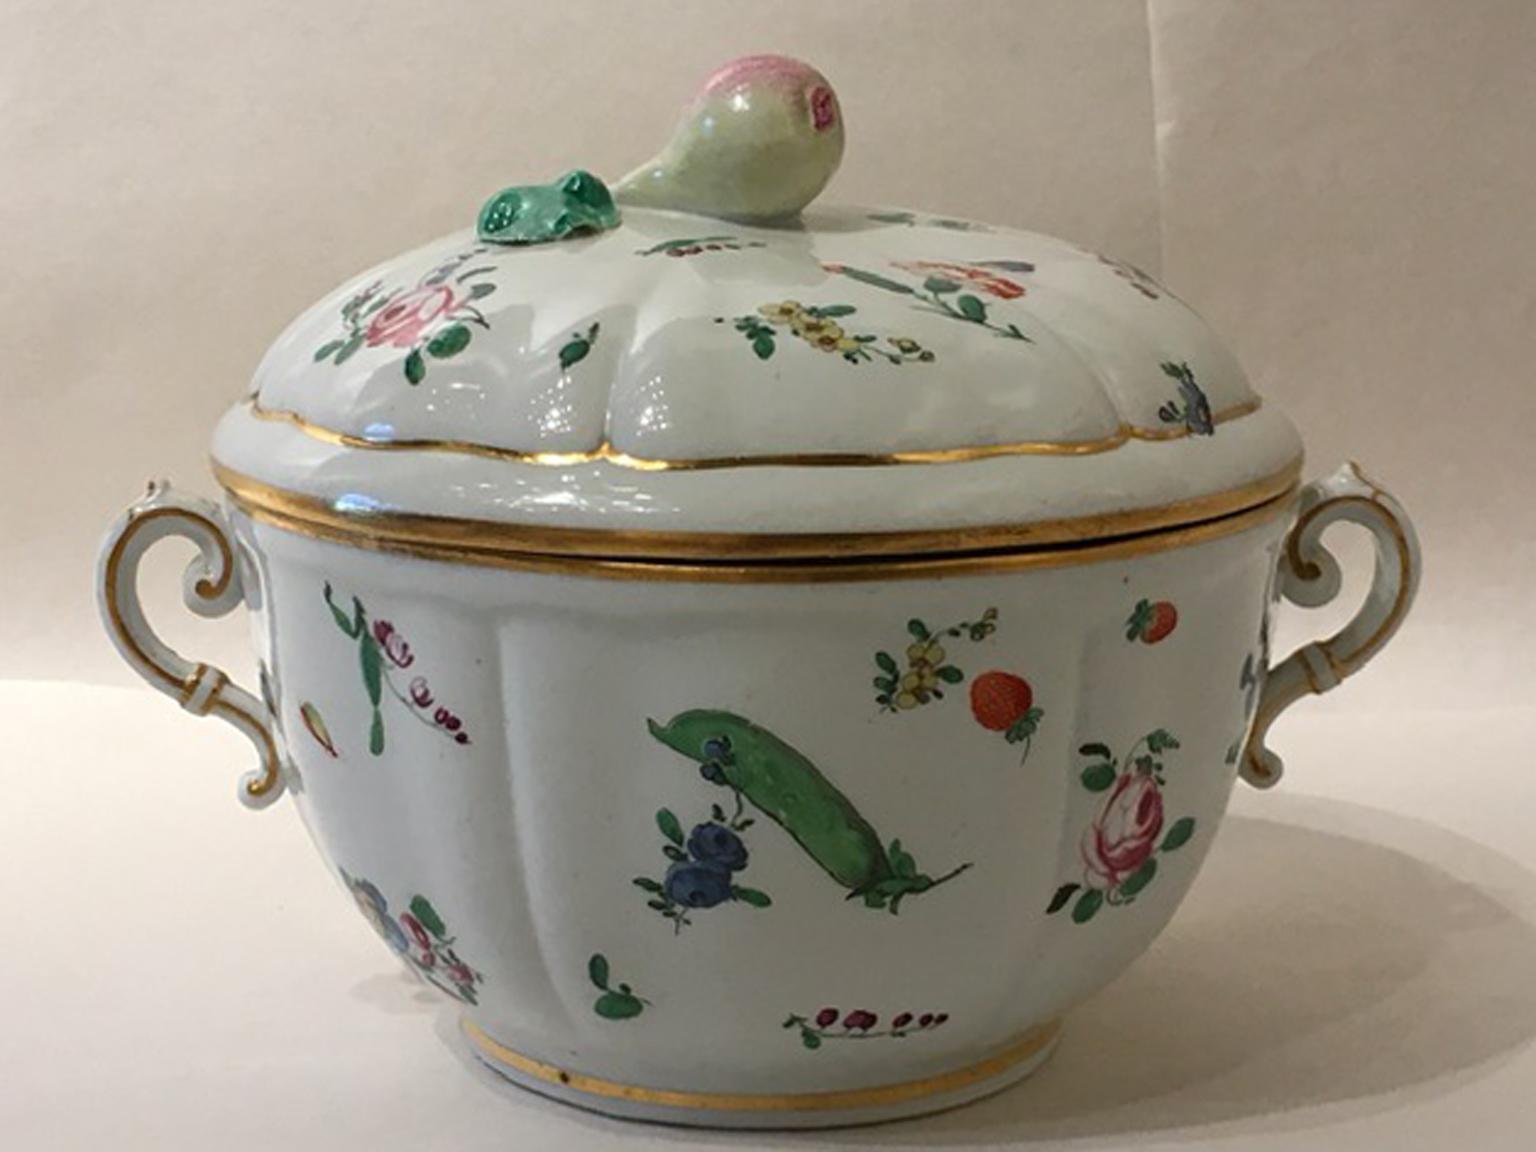 Italy Richard Ginori Mid-19th Century Porcelain Covered In Good Condition For Sale In Brescia, IT